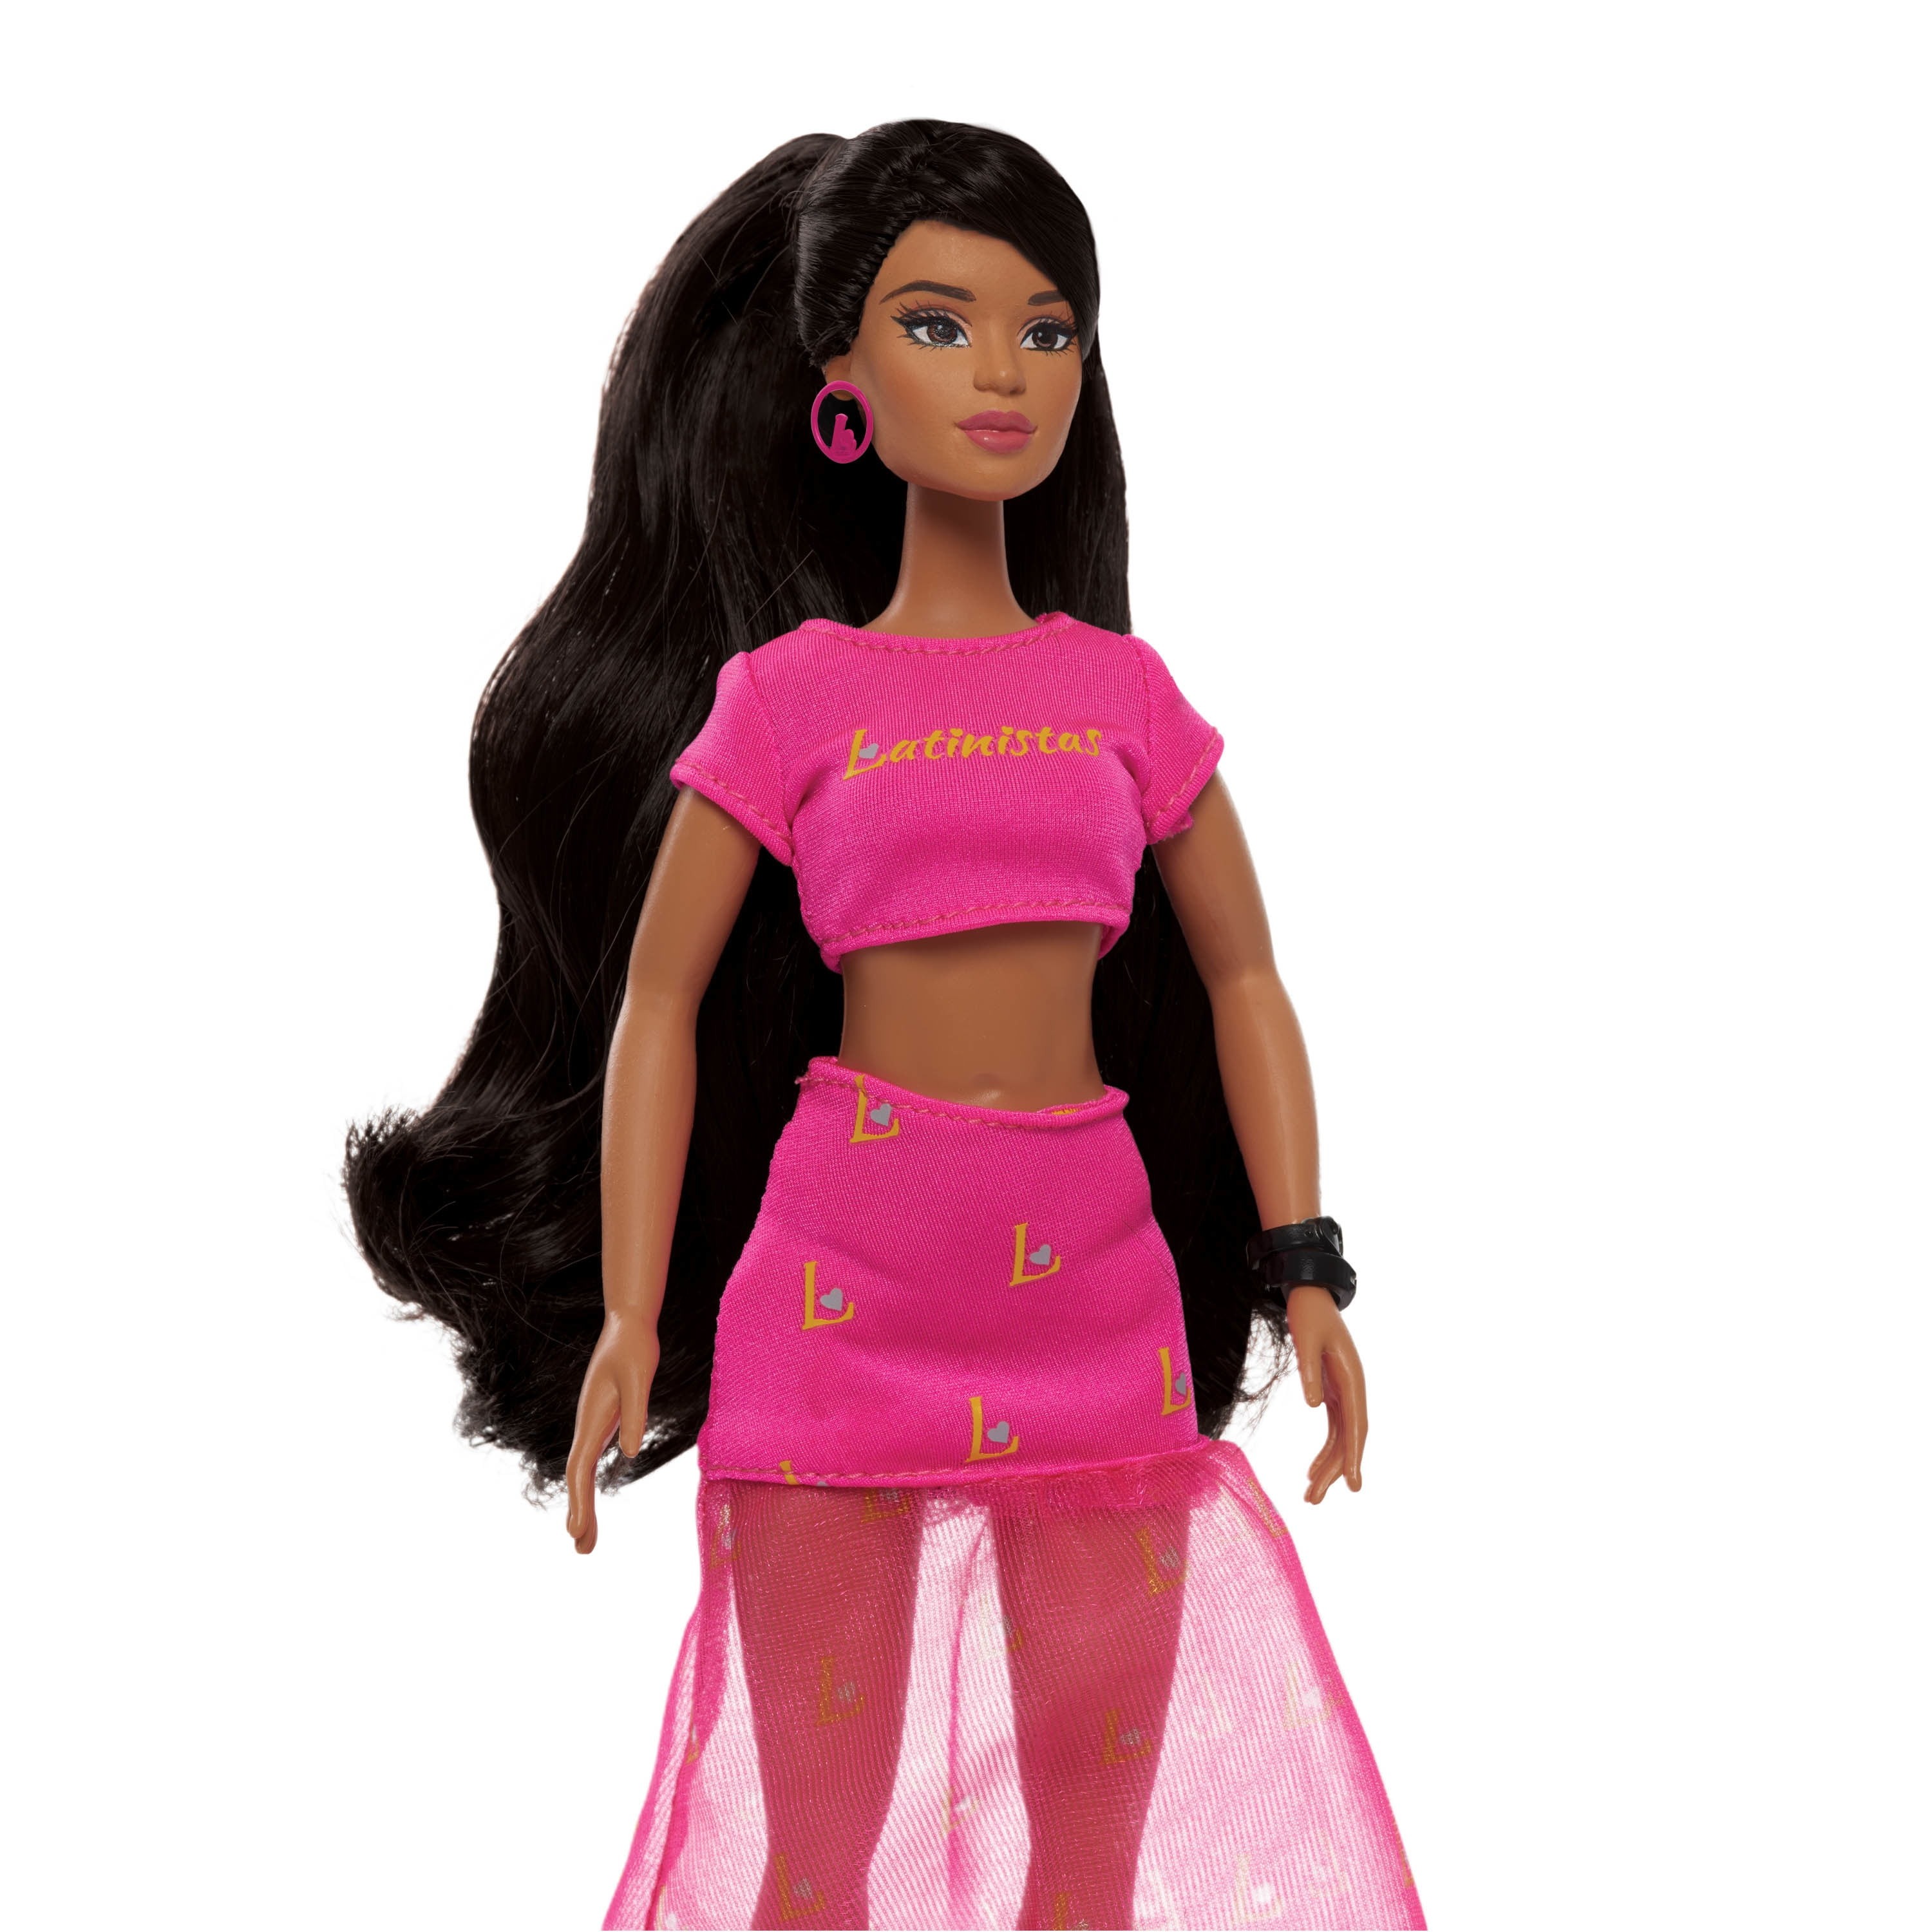 Our Generation Kaelyn with Style Book 18 Hair Play Doll